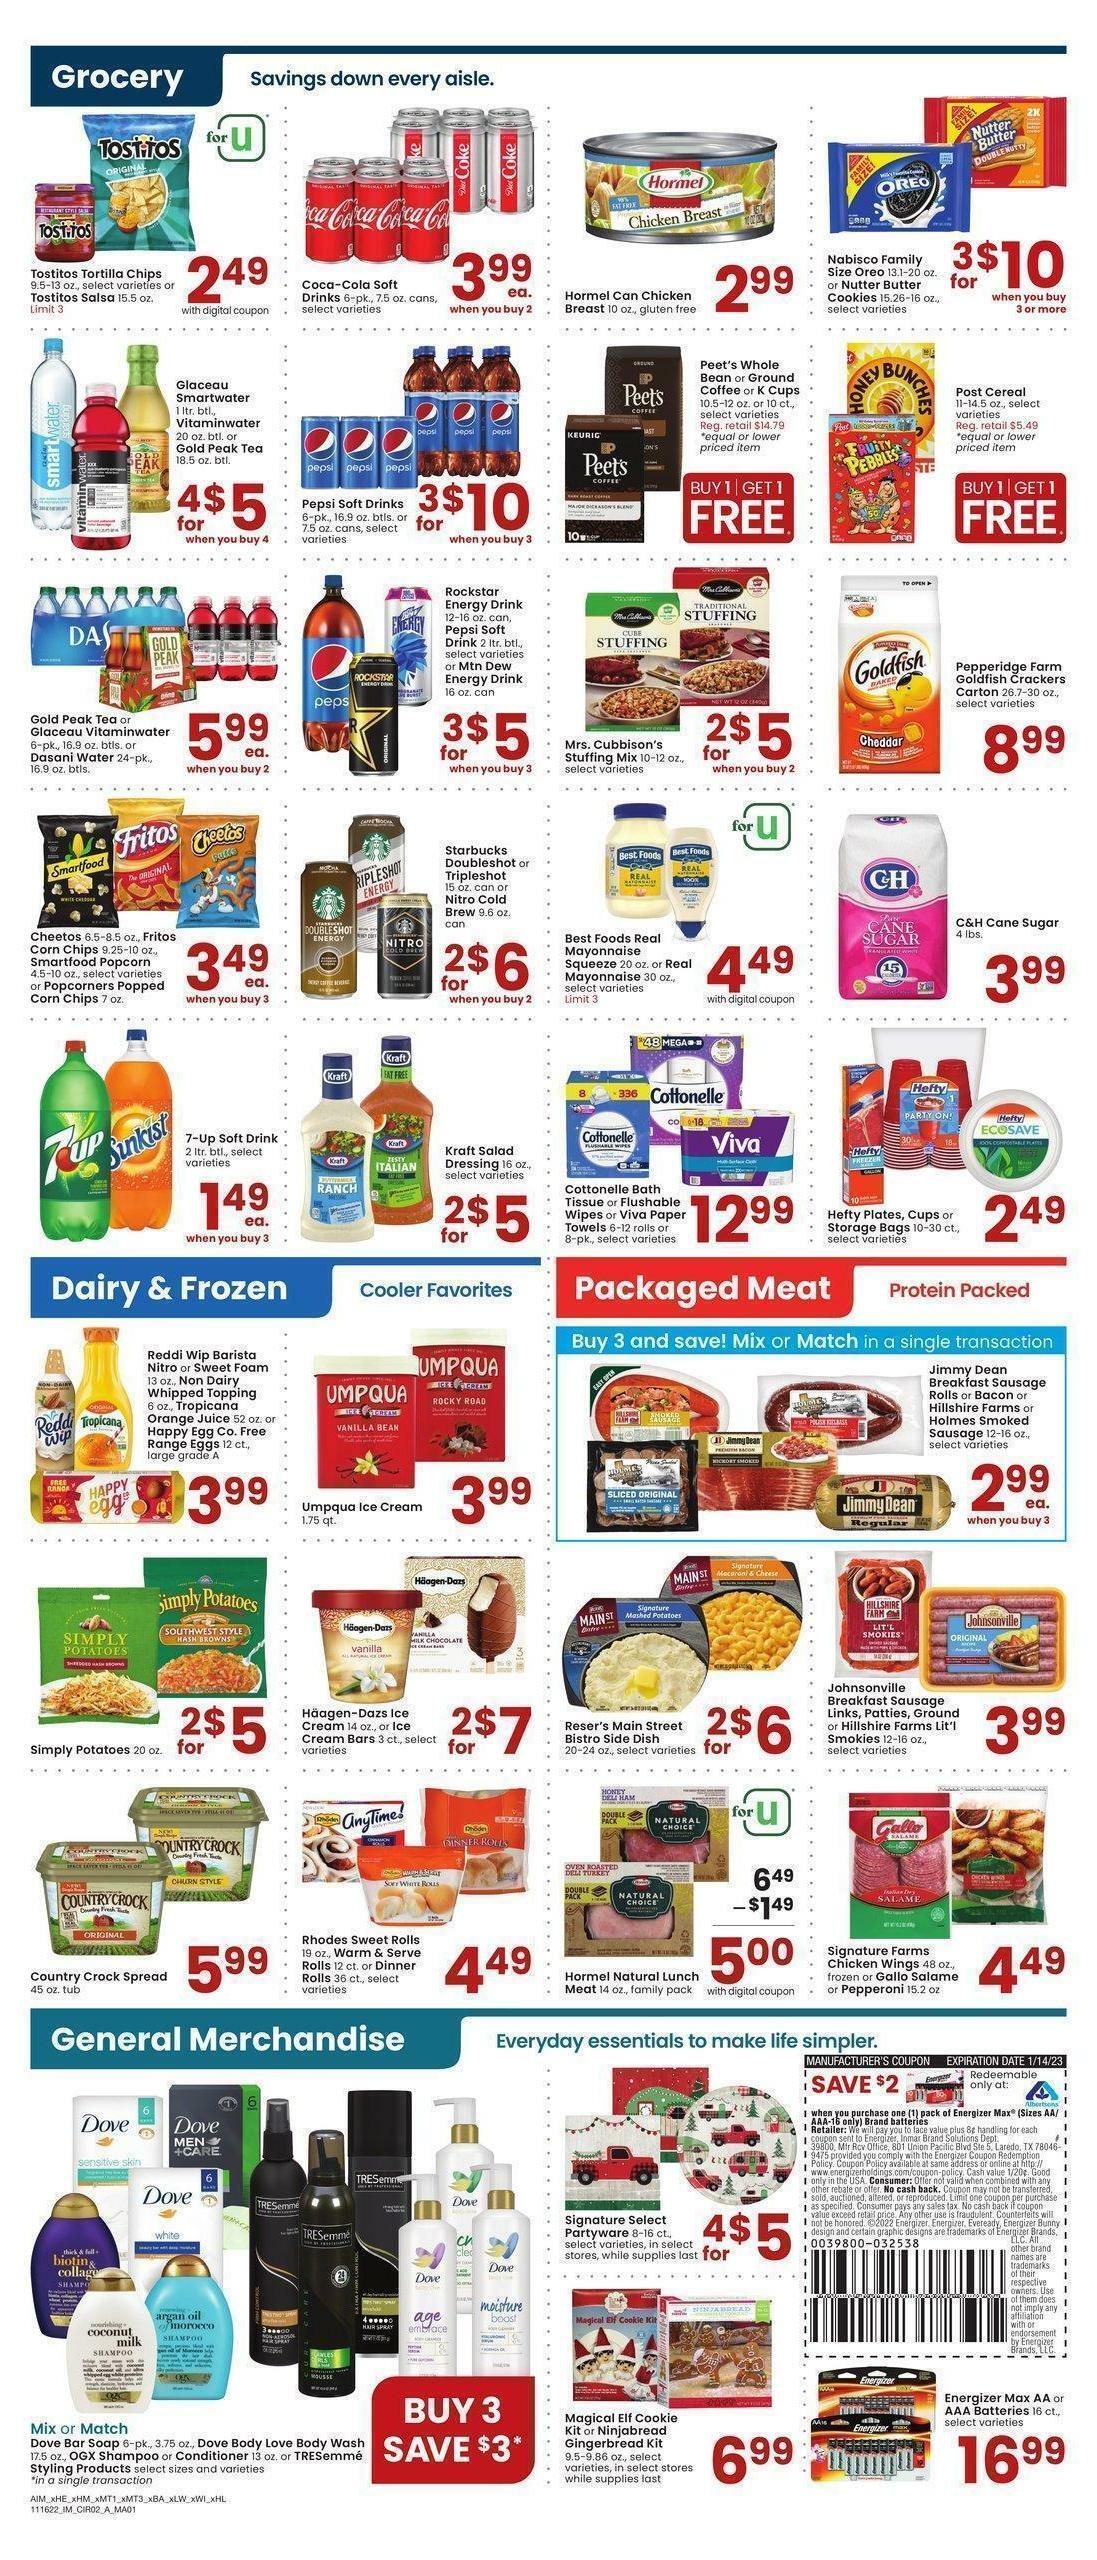 Albertsons Weekly Ad from November 16